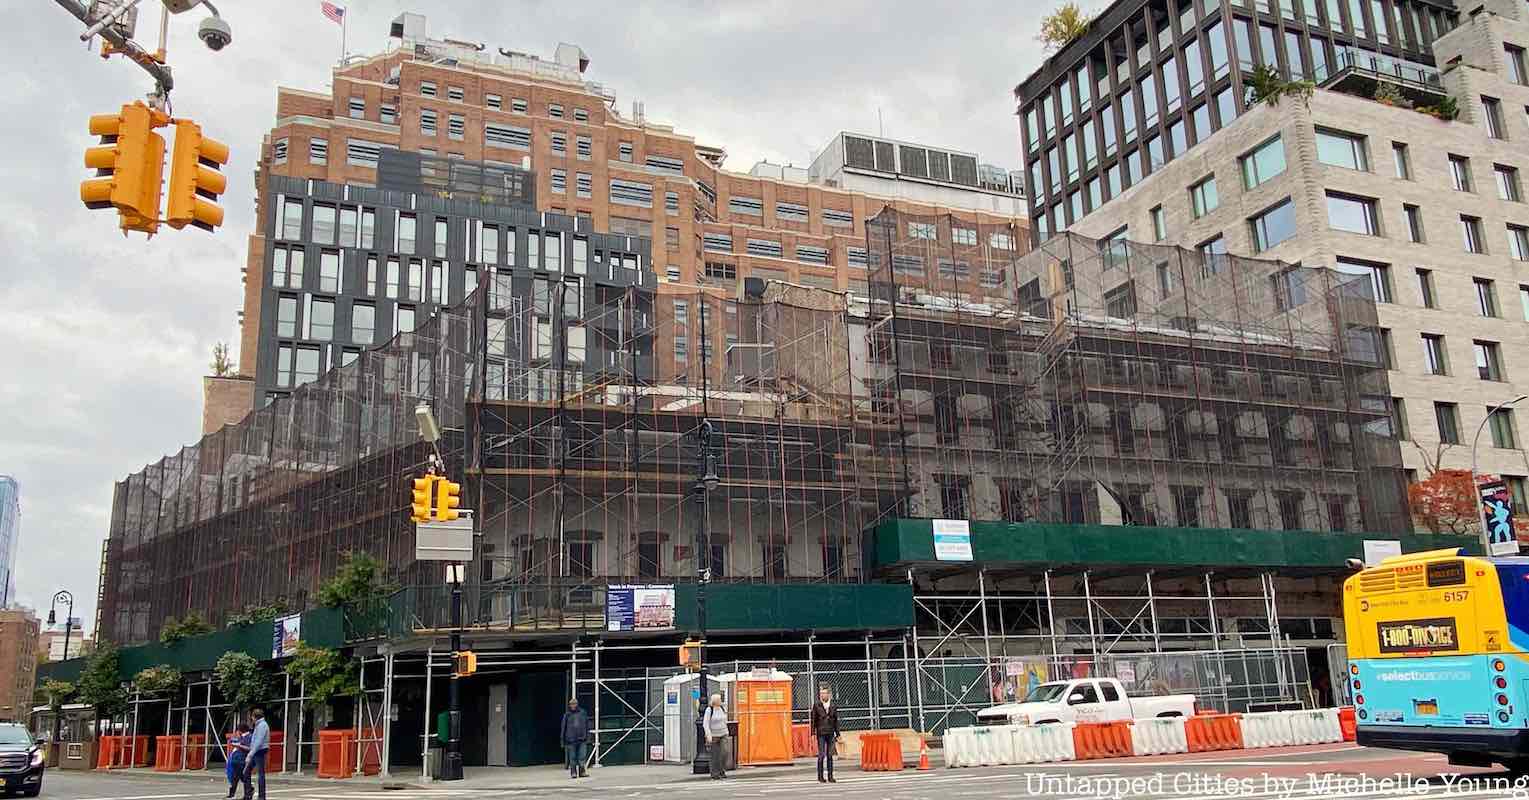 buildings covered by scaffolding in the Gansevoort Market Historic District